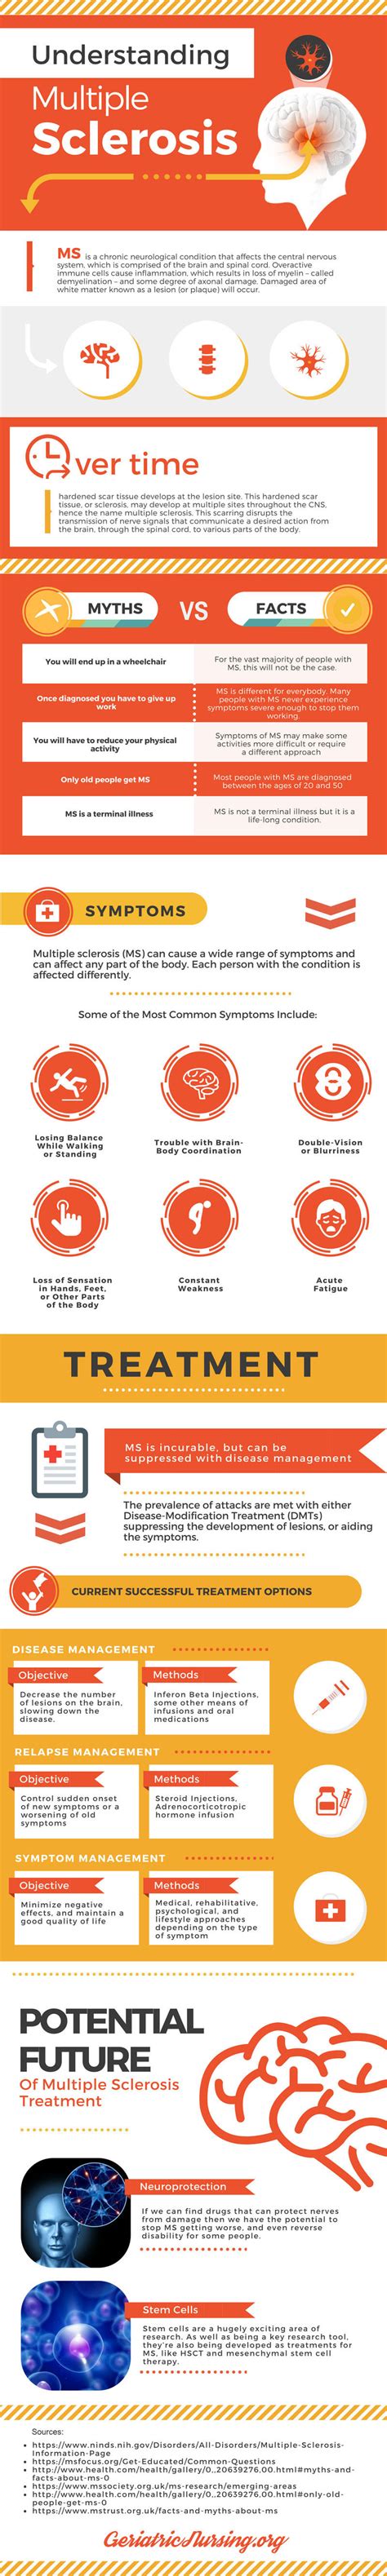 What are usually the first signs and symptoms of ms? Understanding Multiple Sclerosis: History, Signs ...